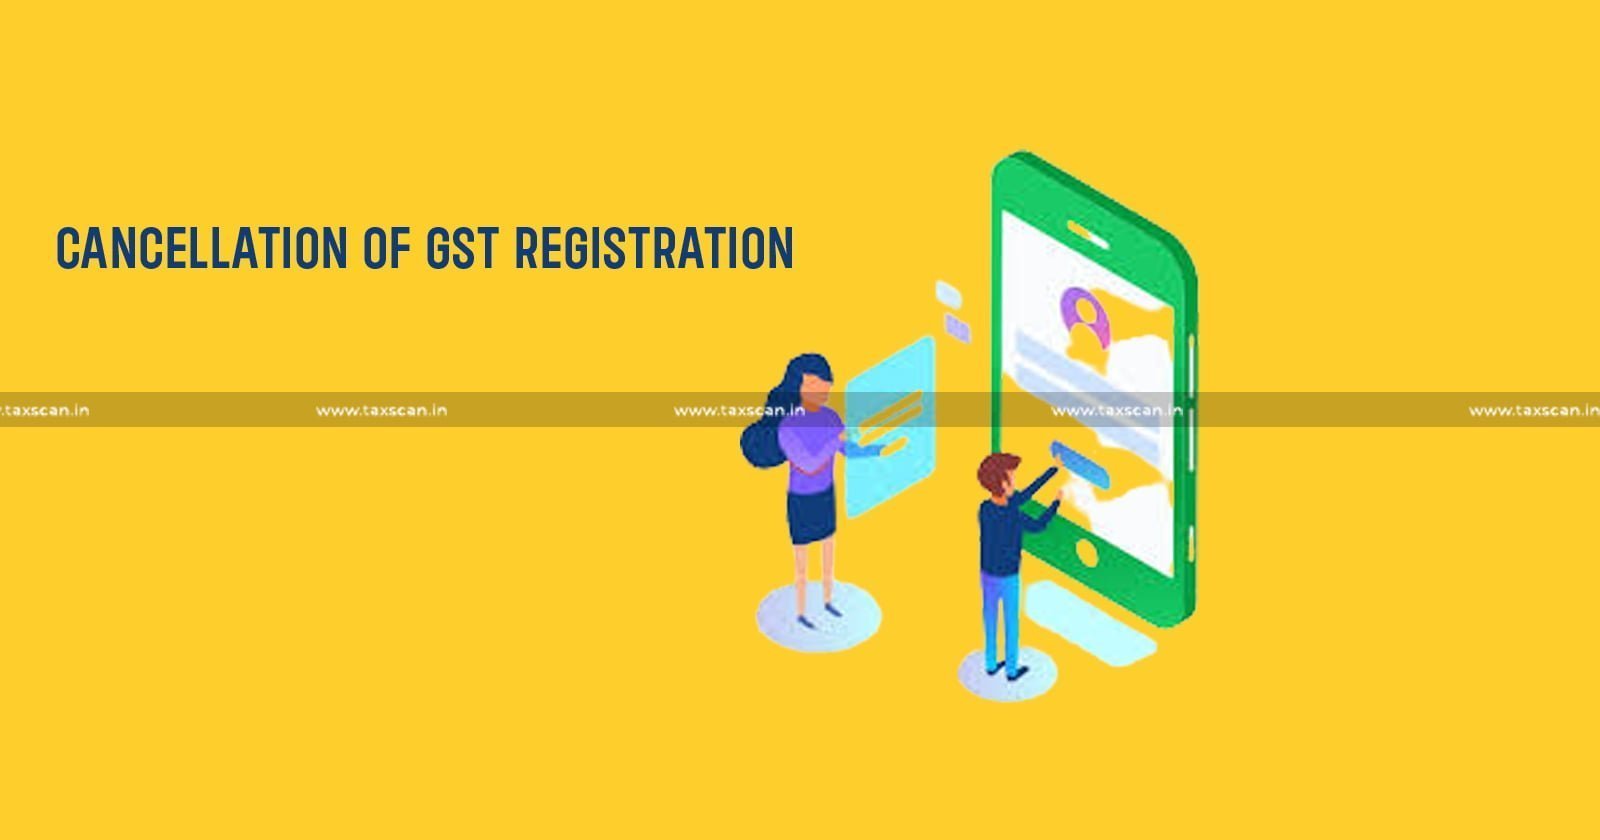 Cancellation of GST Registration - GST Council - Revocation of Cancellation of GST Registration - One Time Amnesty for Past Cases - Taxscan